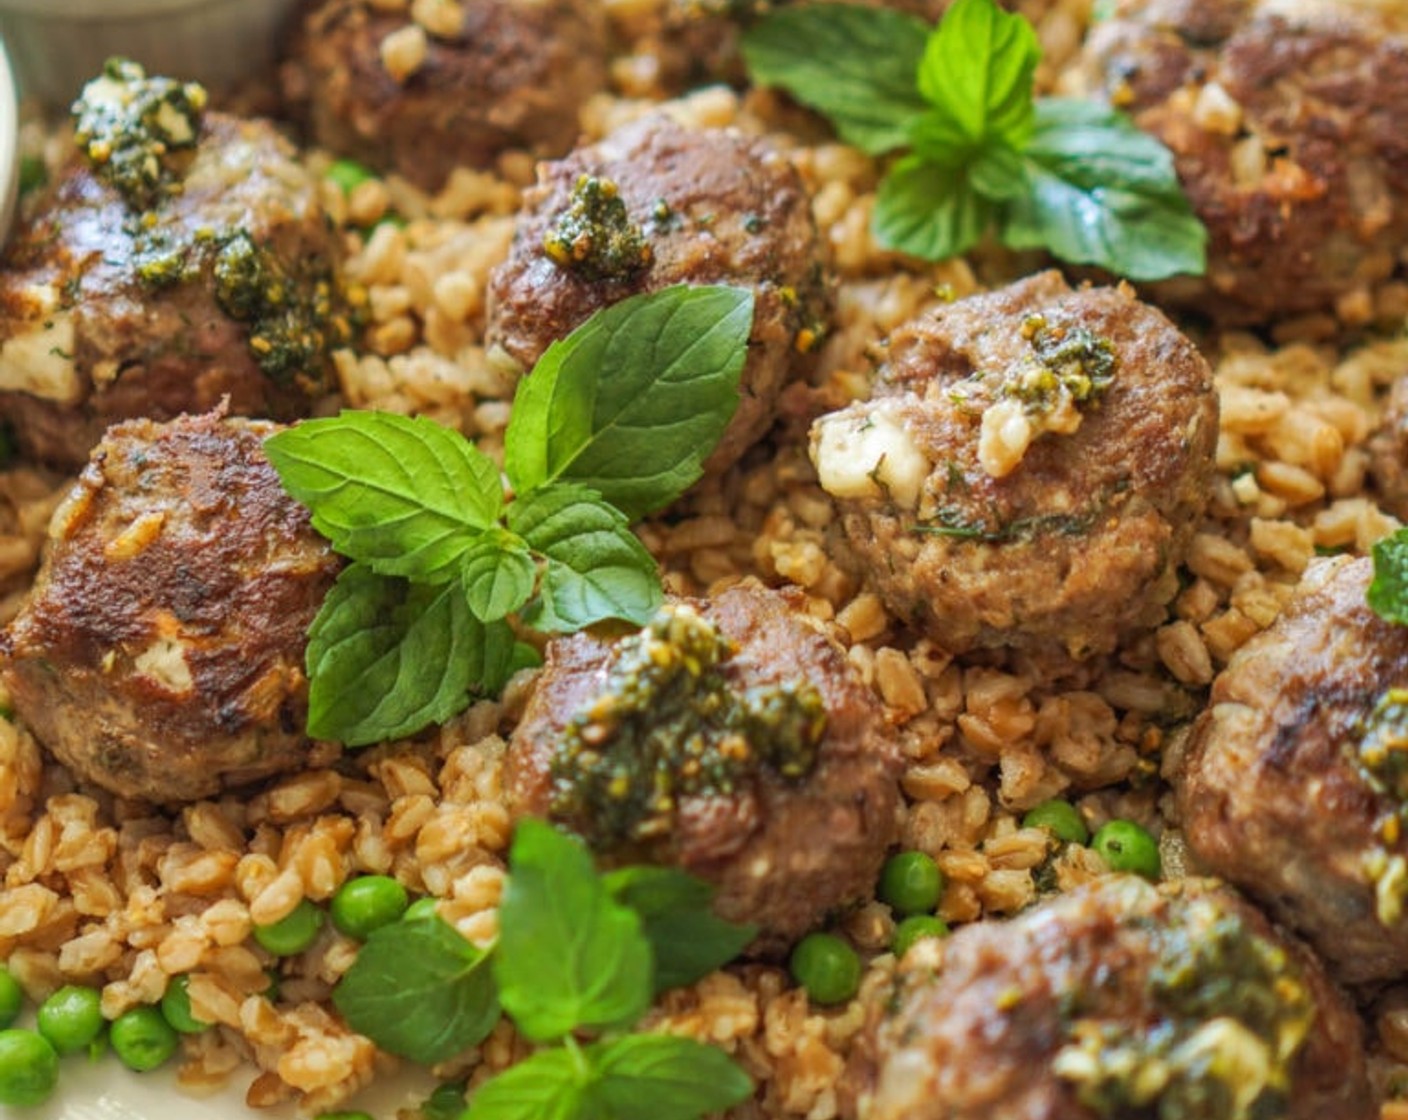 step 10 To serve, arrange the farro on a large serving platter. Cover with the meatballs and some fresh Fresh Mint (to taste) (optional). Enjoy!